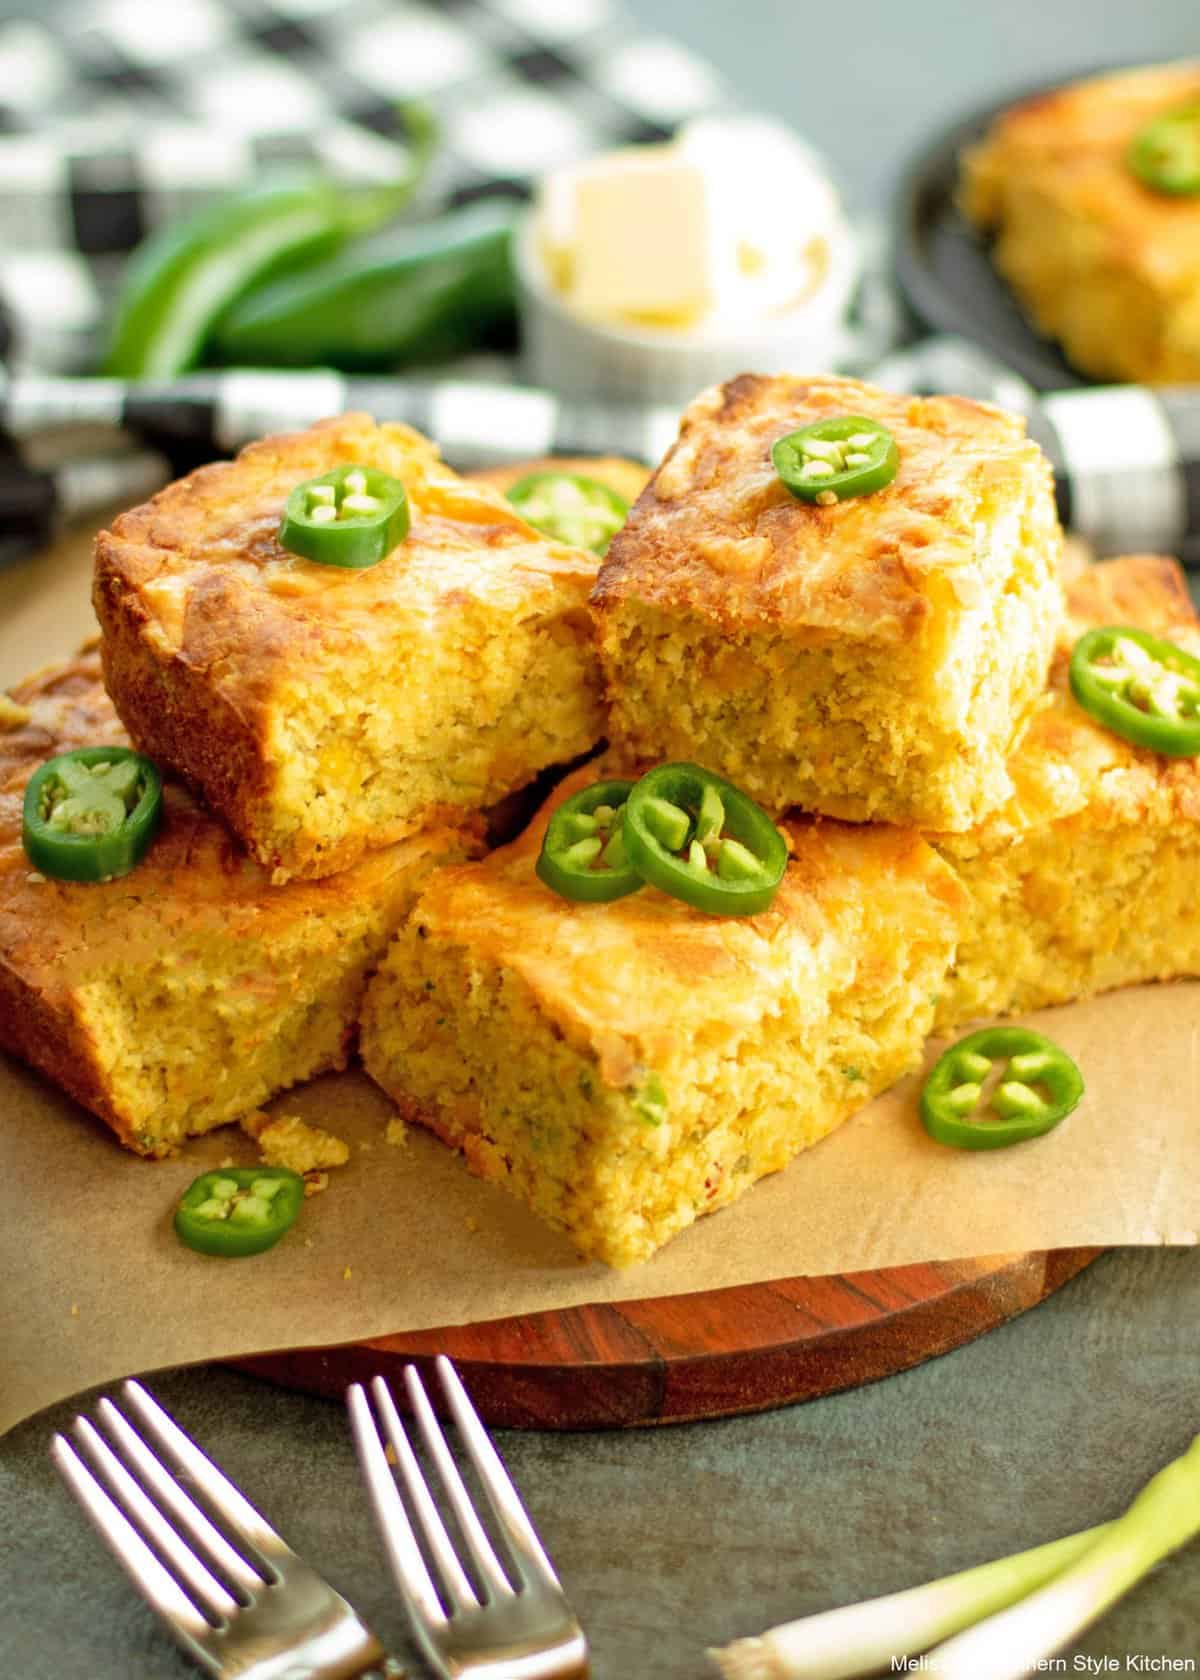 Squares of Mexican cornbread ganrished with slices of jalapenos. 